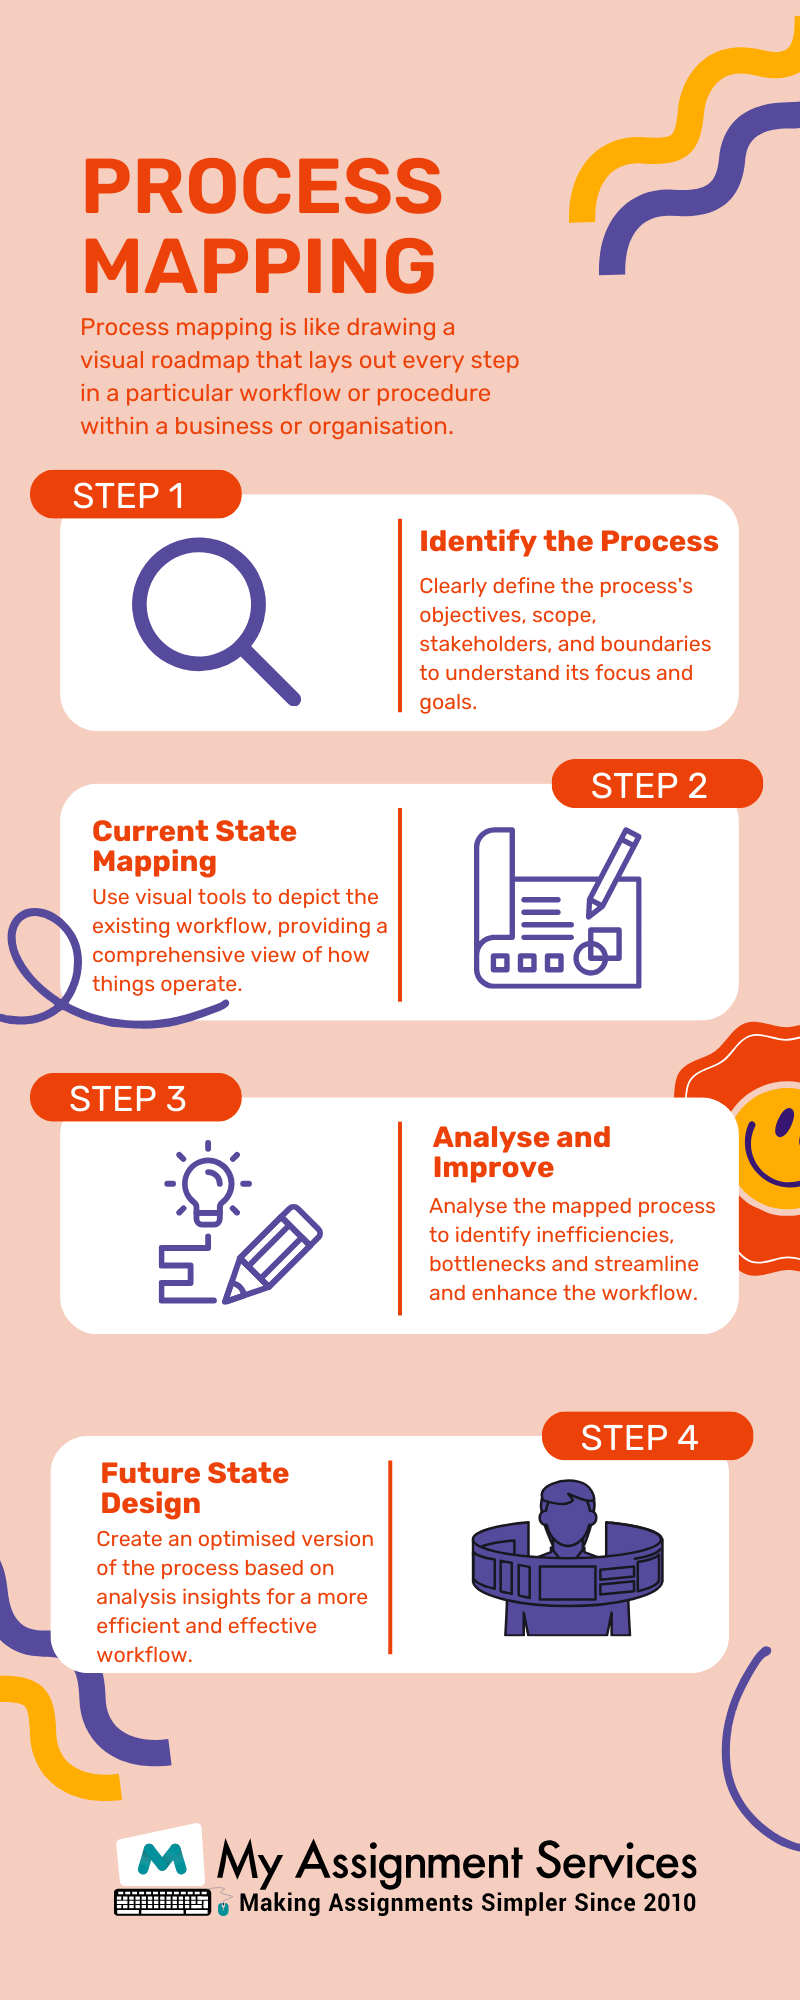 What are the 4 Key Steps of Mapping a Business Process Effectively